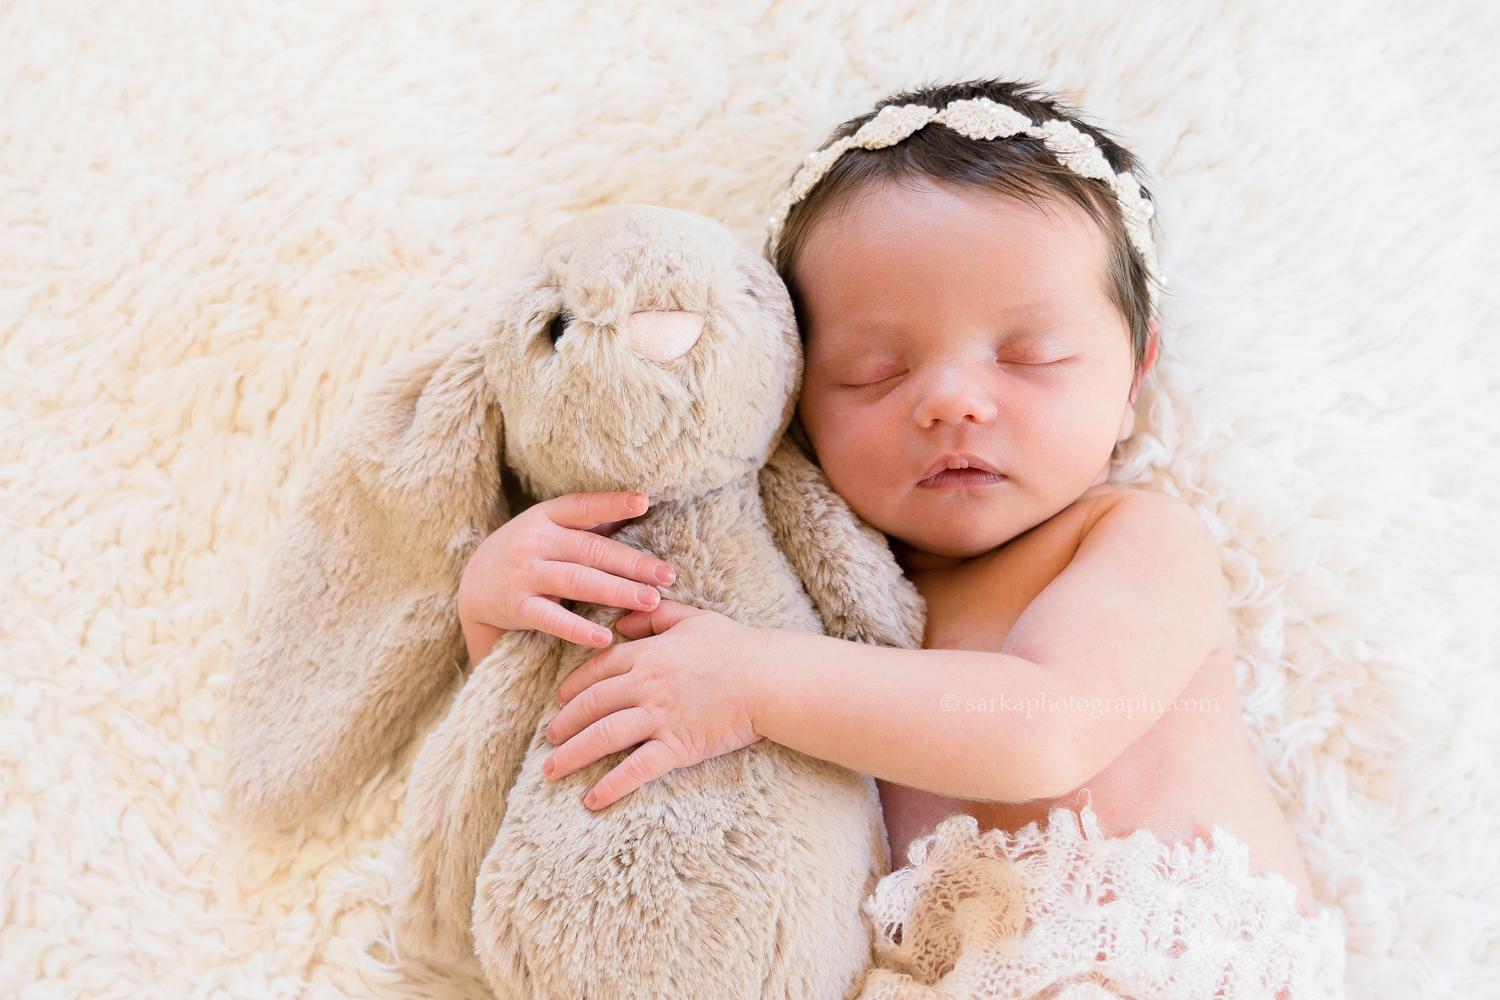 newborn baby girl snuggling a stuffed animal bunny during her baby photo session in Santa Barbara